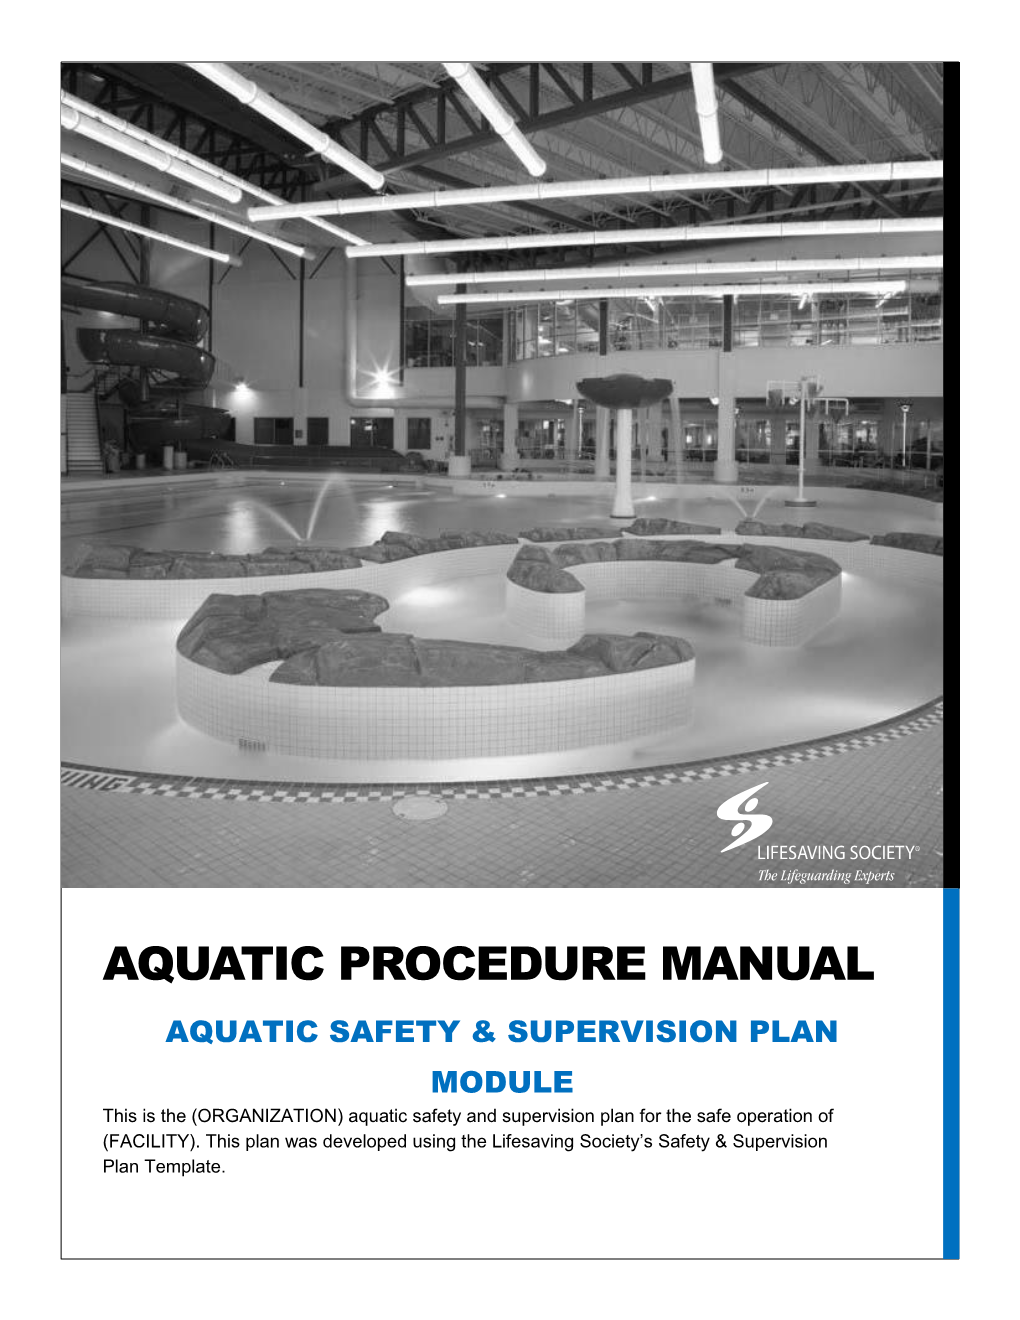 AQUATIC PROCEDURE MANUAL AQUATIC SAFETY & SUPERVISION PLAN MODULE This Is the (ORGANIZATION) Aquatic Safety and Supervision Plan for the Safe Operation of (FACILITY)